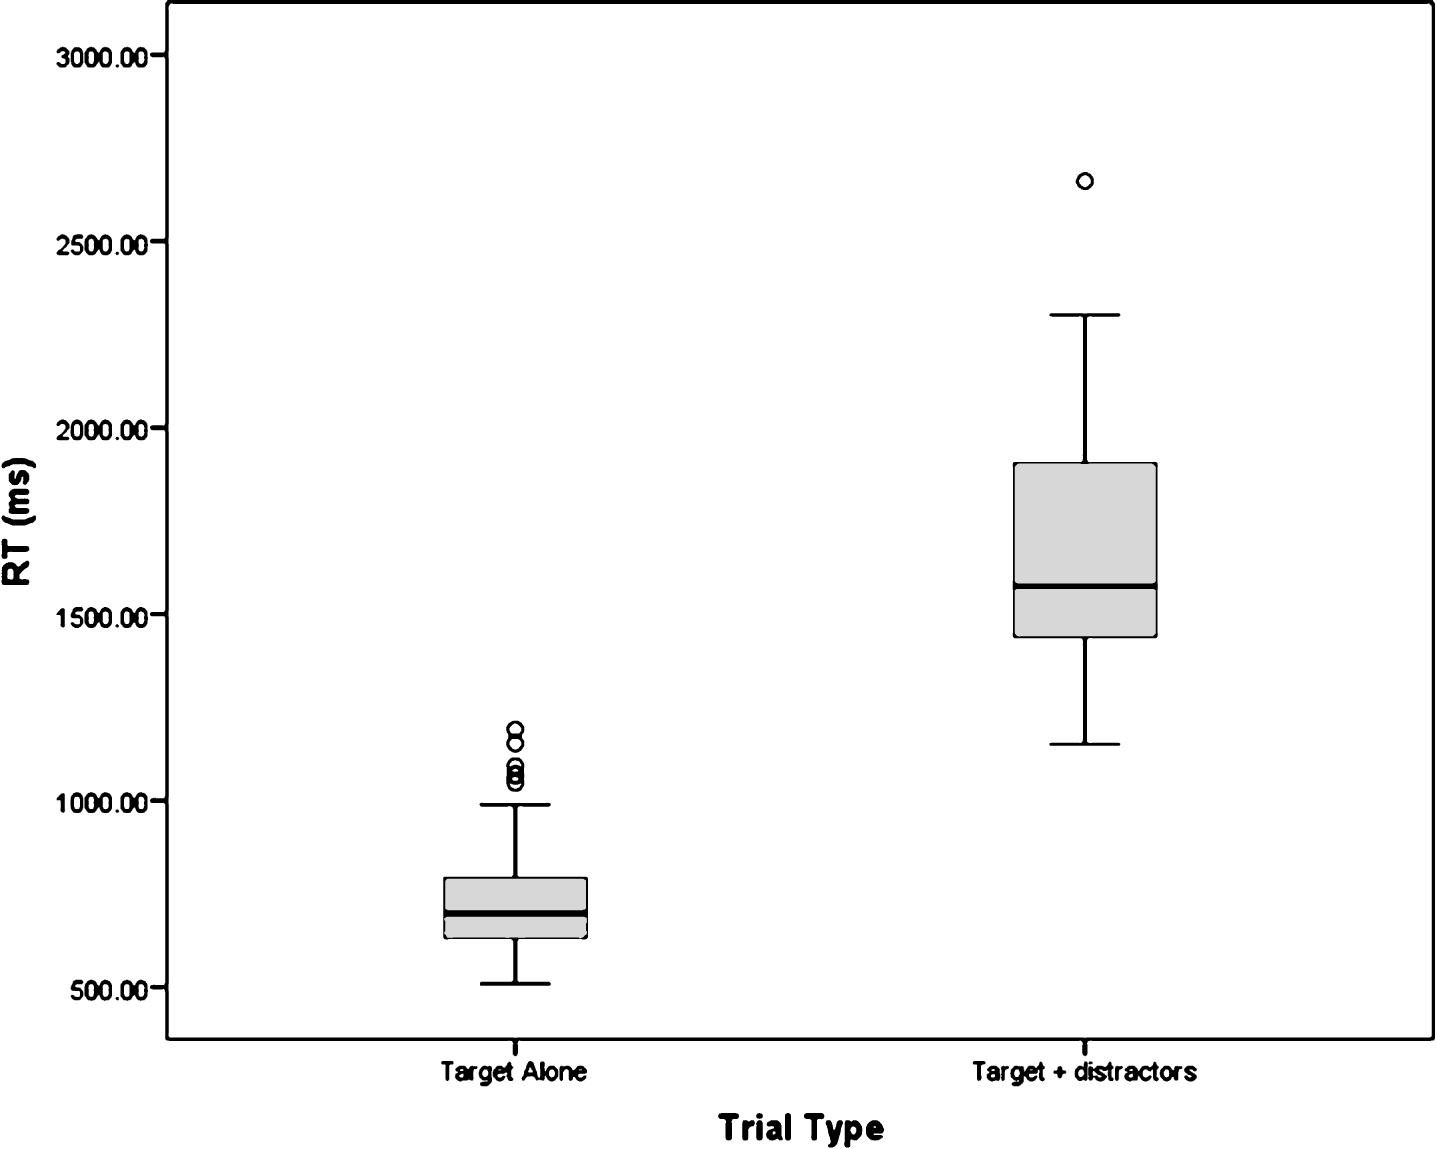 Box plot of mean information processing speed (ms) for target alone and target plus distracters trials.